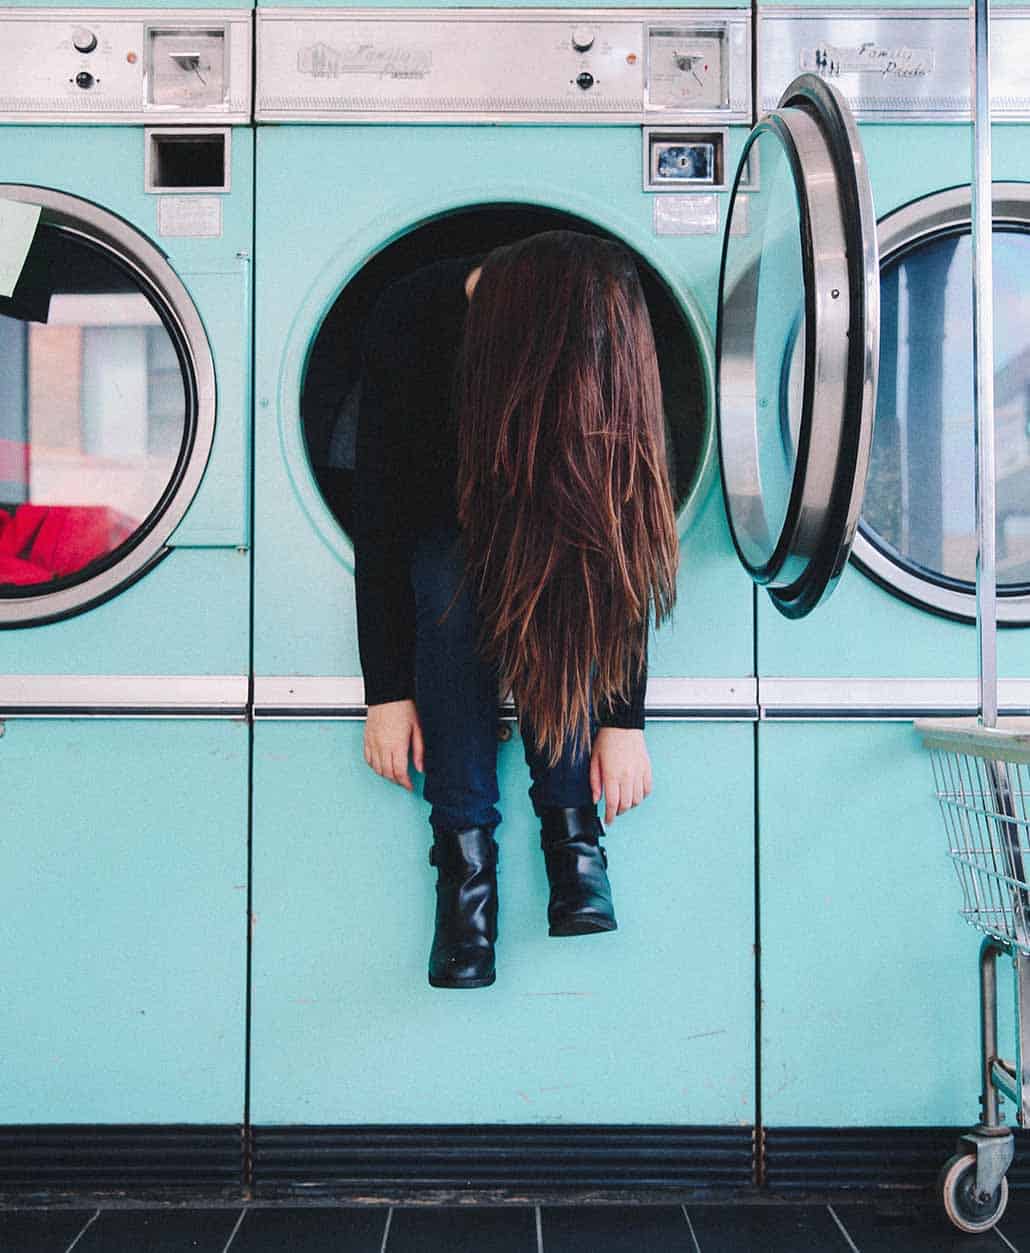 child sitting in blue washing machine hanging her legs and arms out while dangling head admitting defeat over head lice